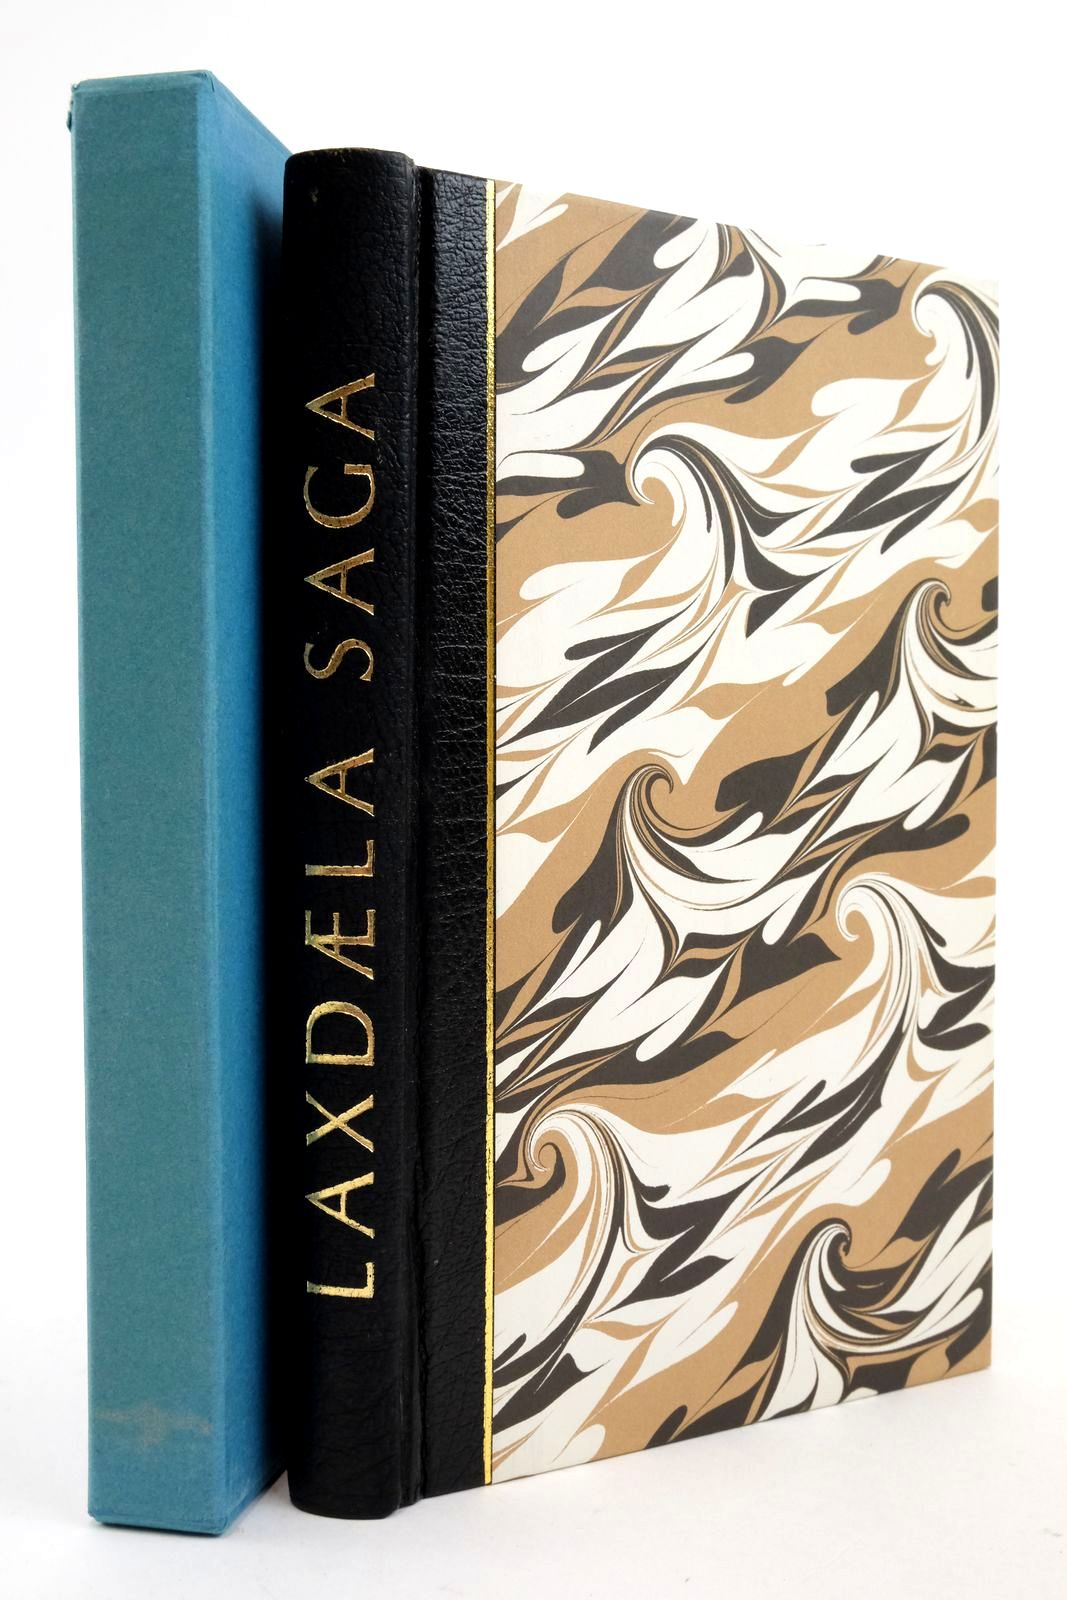 Photo of LAXDAELA SAGA written by Magnusson, Magnus Palsson, Hermann illustrated by Pendrey, Peter published by Folio Society (STOCK CODE: 2138271)  for sale by Stella & Rose's Books